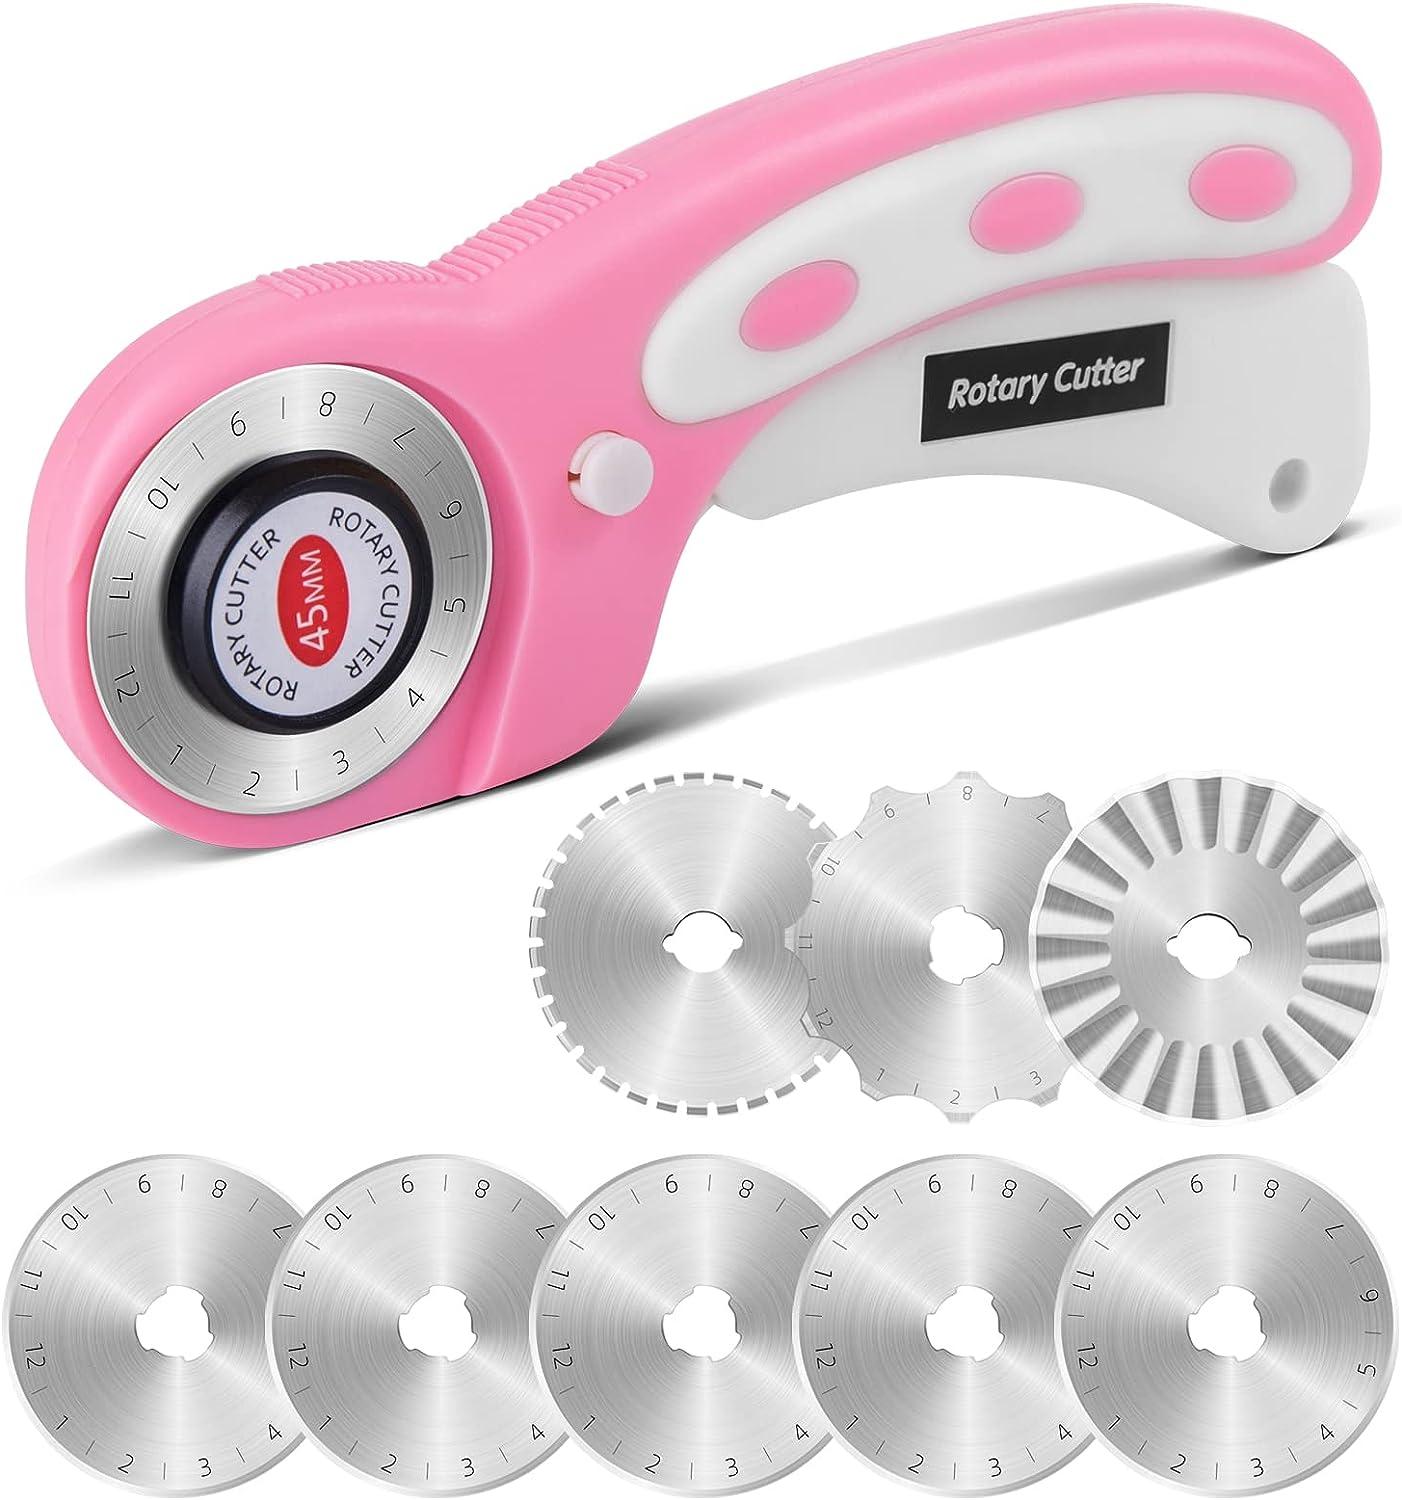 45mm Rotary Cutter with Soft-Touch Handle